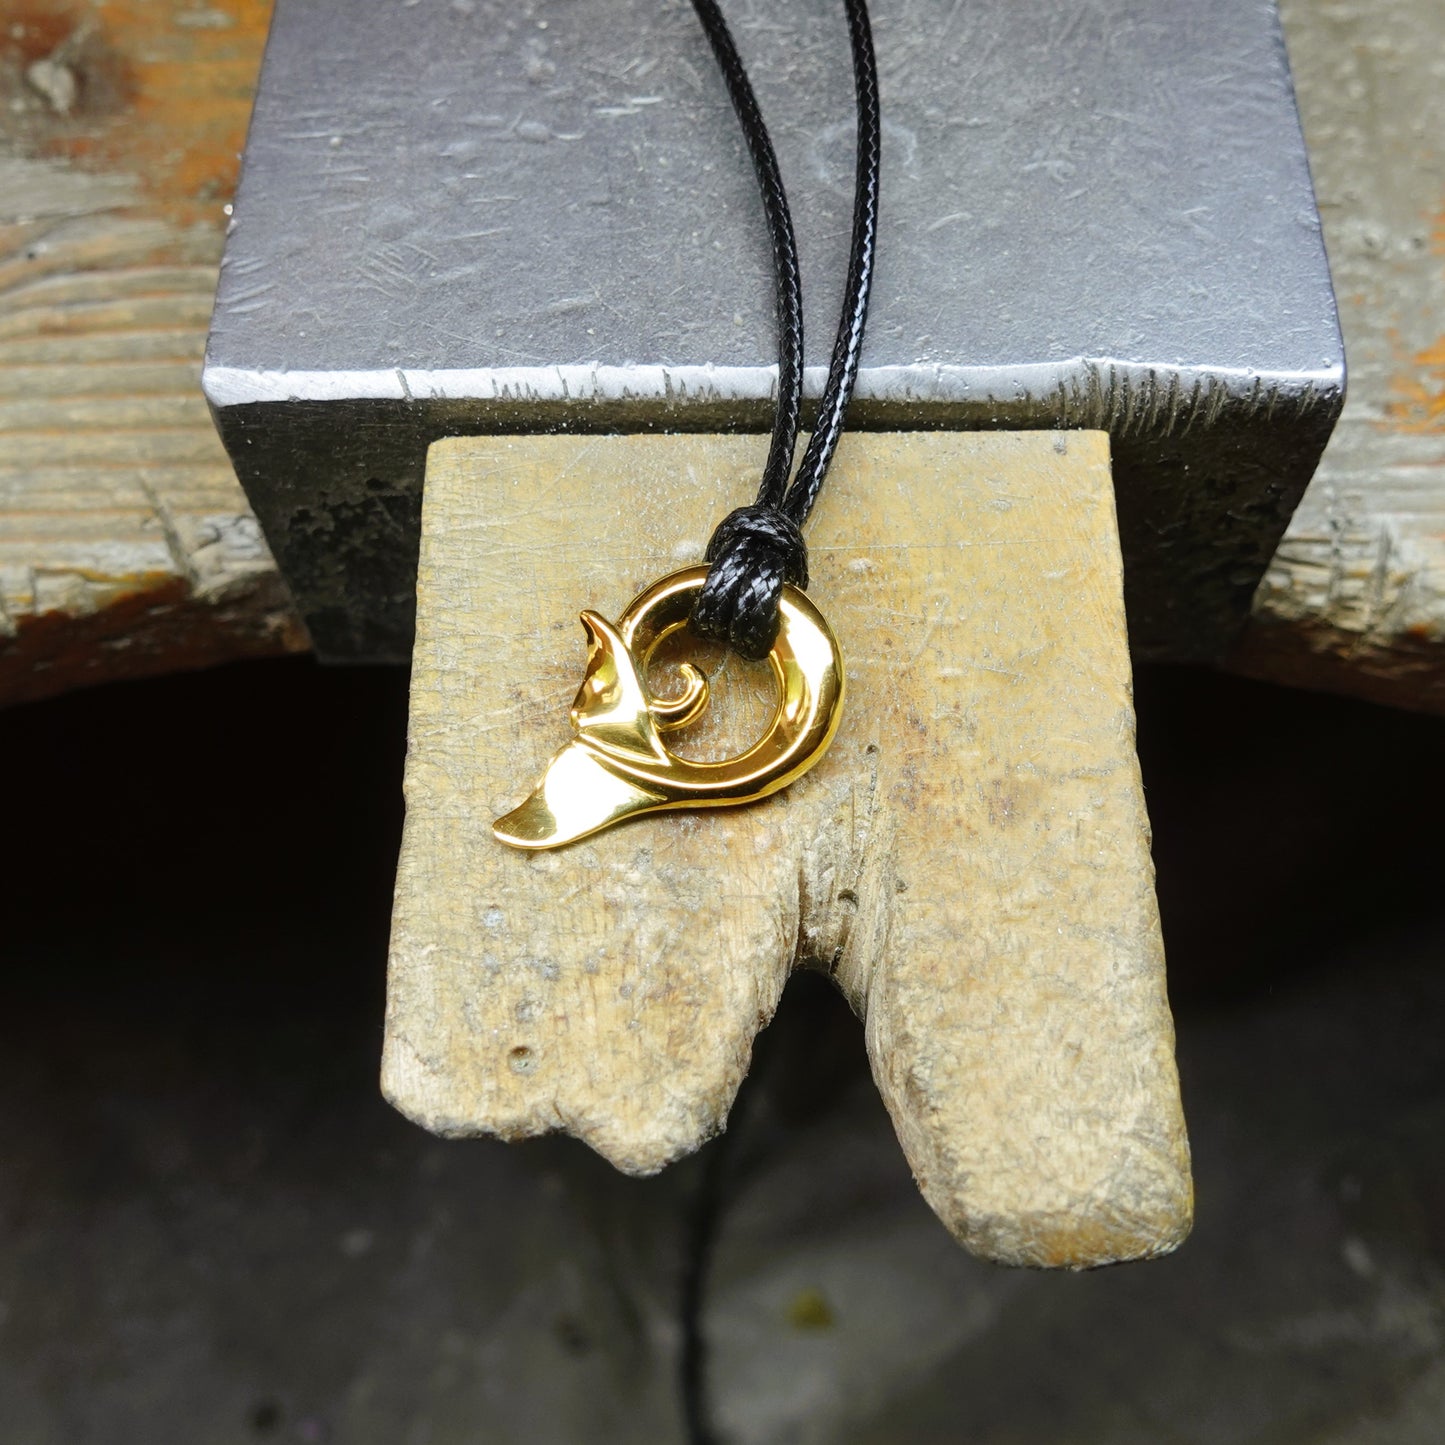 Whale tail necklace. Solid precious metal whale fluke design, available in yellow gold, white gold or platinum. This piece will be handmade for you.